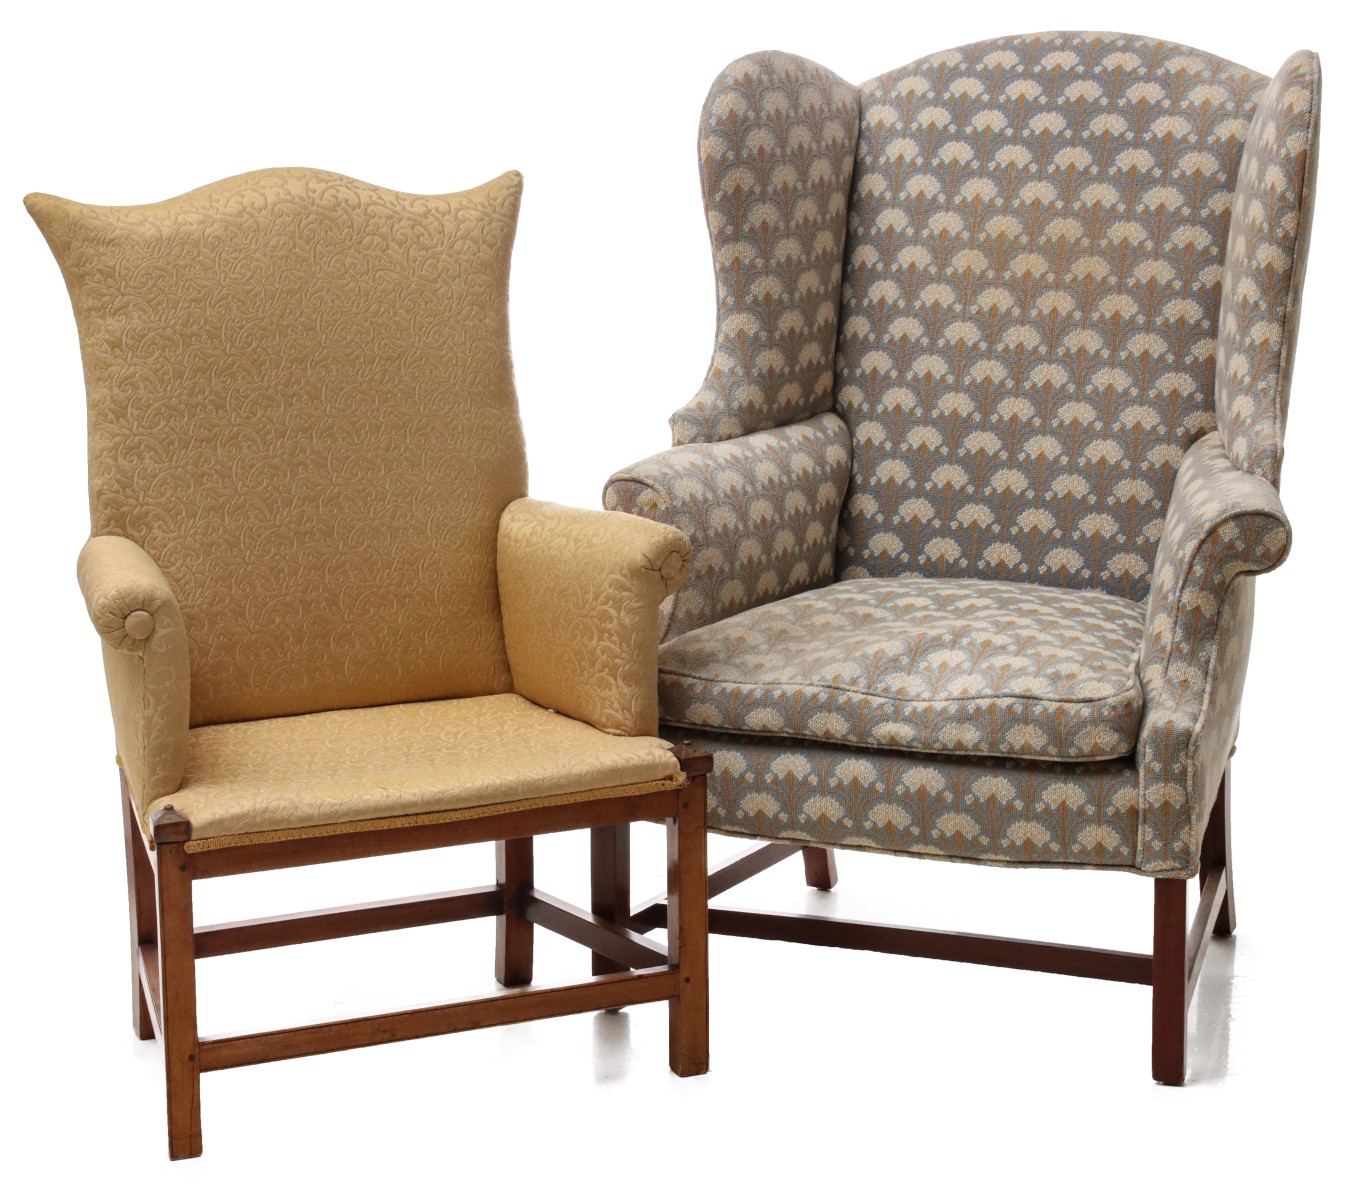 A CIRCA 1800 WING BACK CHAIR, PLUS ANOTHER